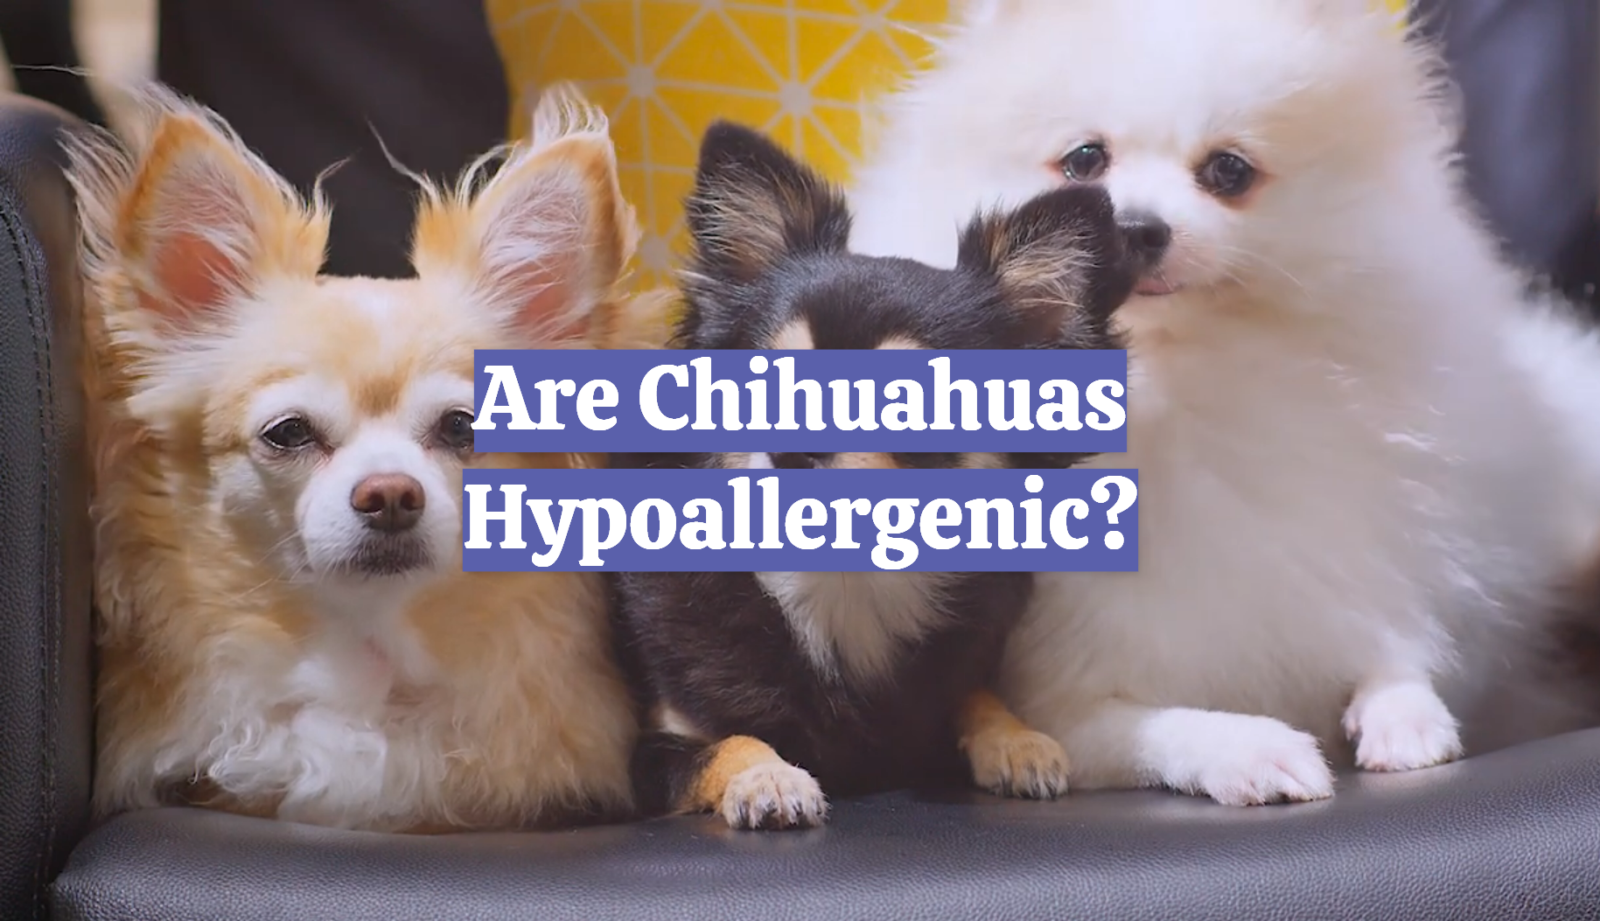 Are Chihuahuas Hypoallergenic?